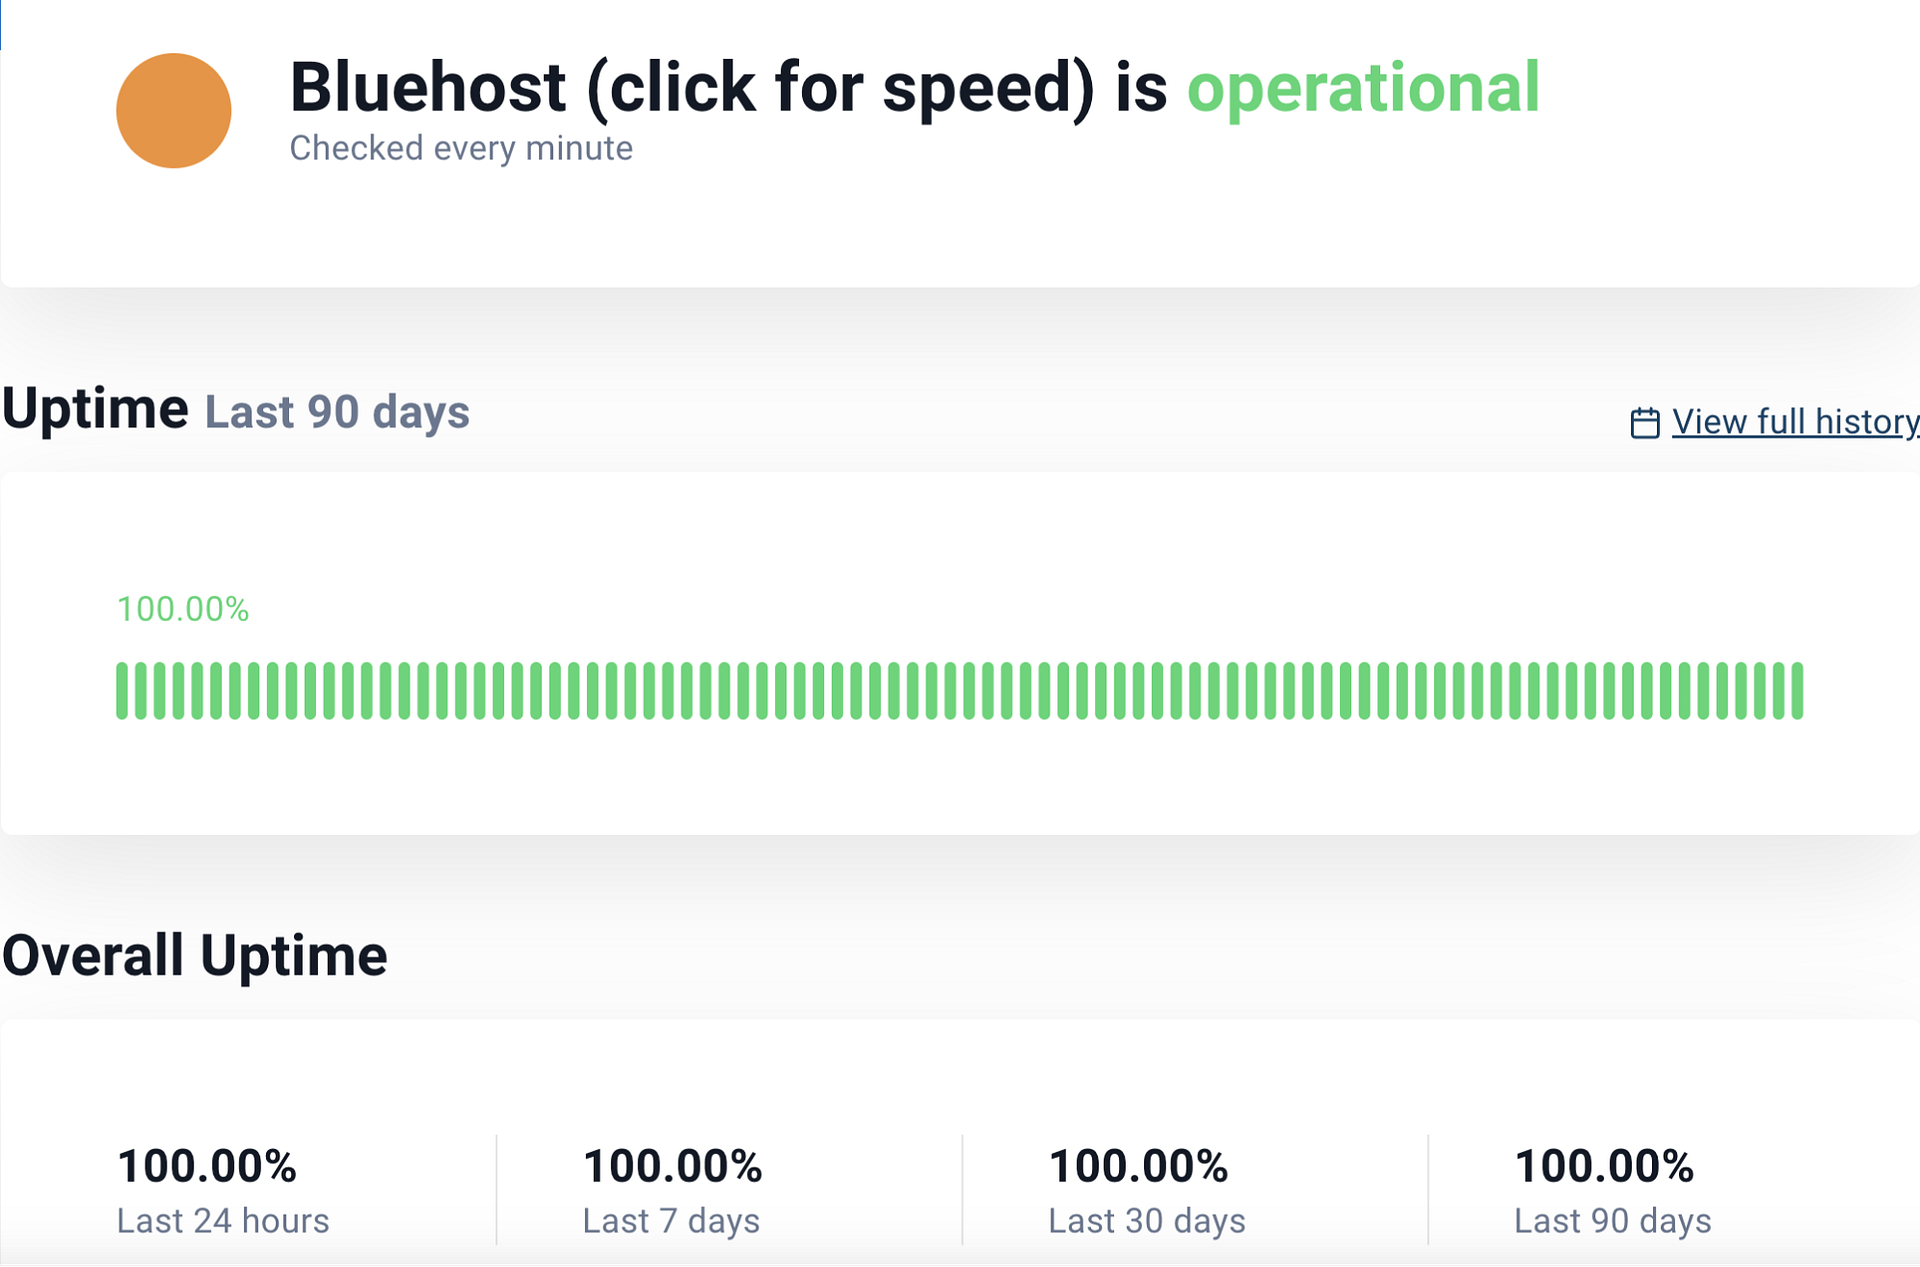 Bluehost uptime over 90 days.